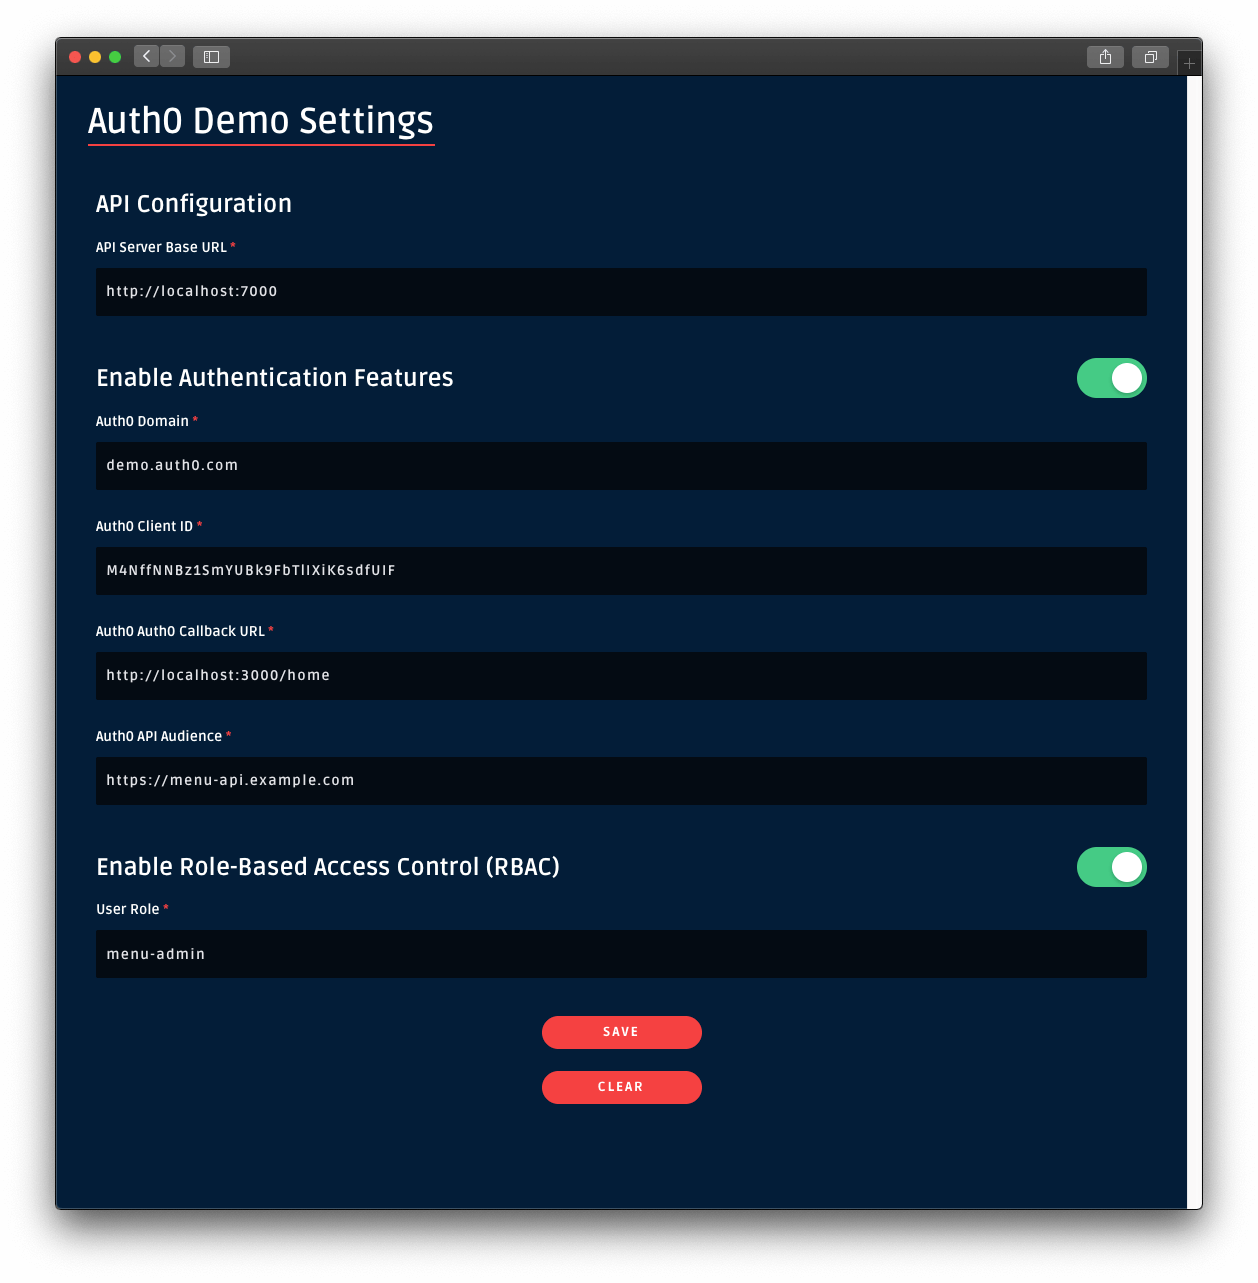 Adding a user role in the demo settings